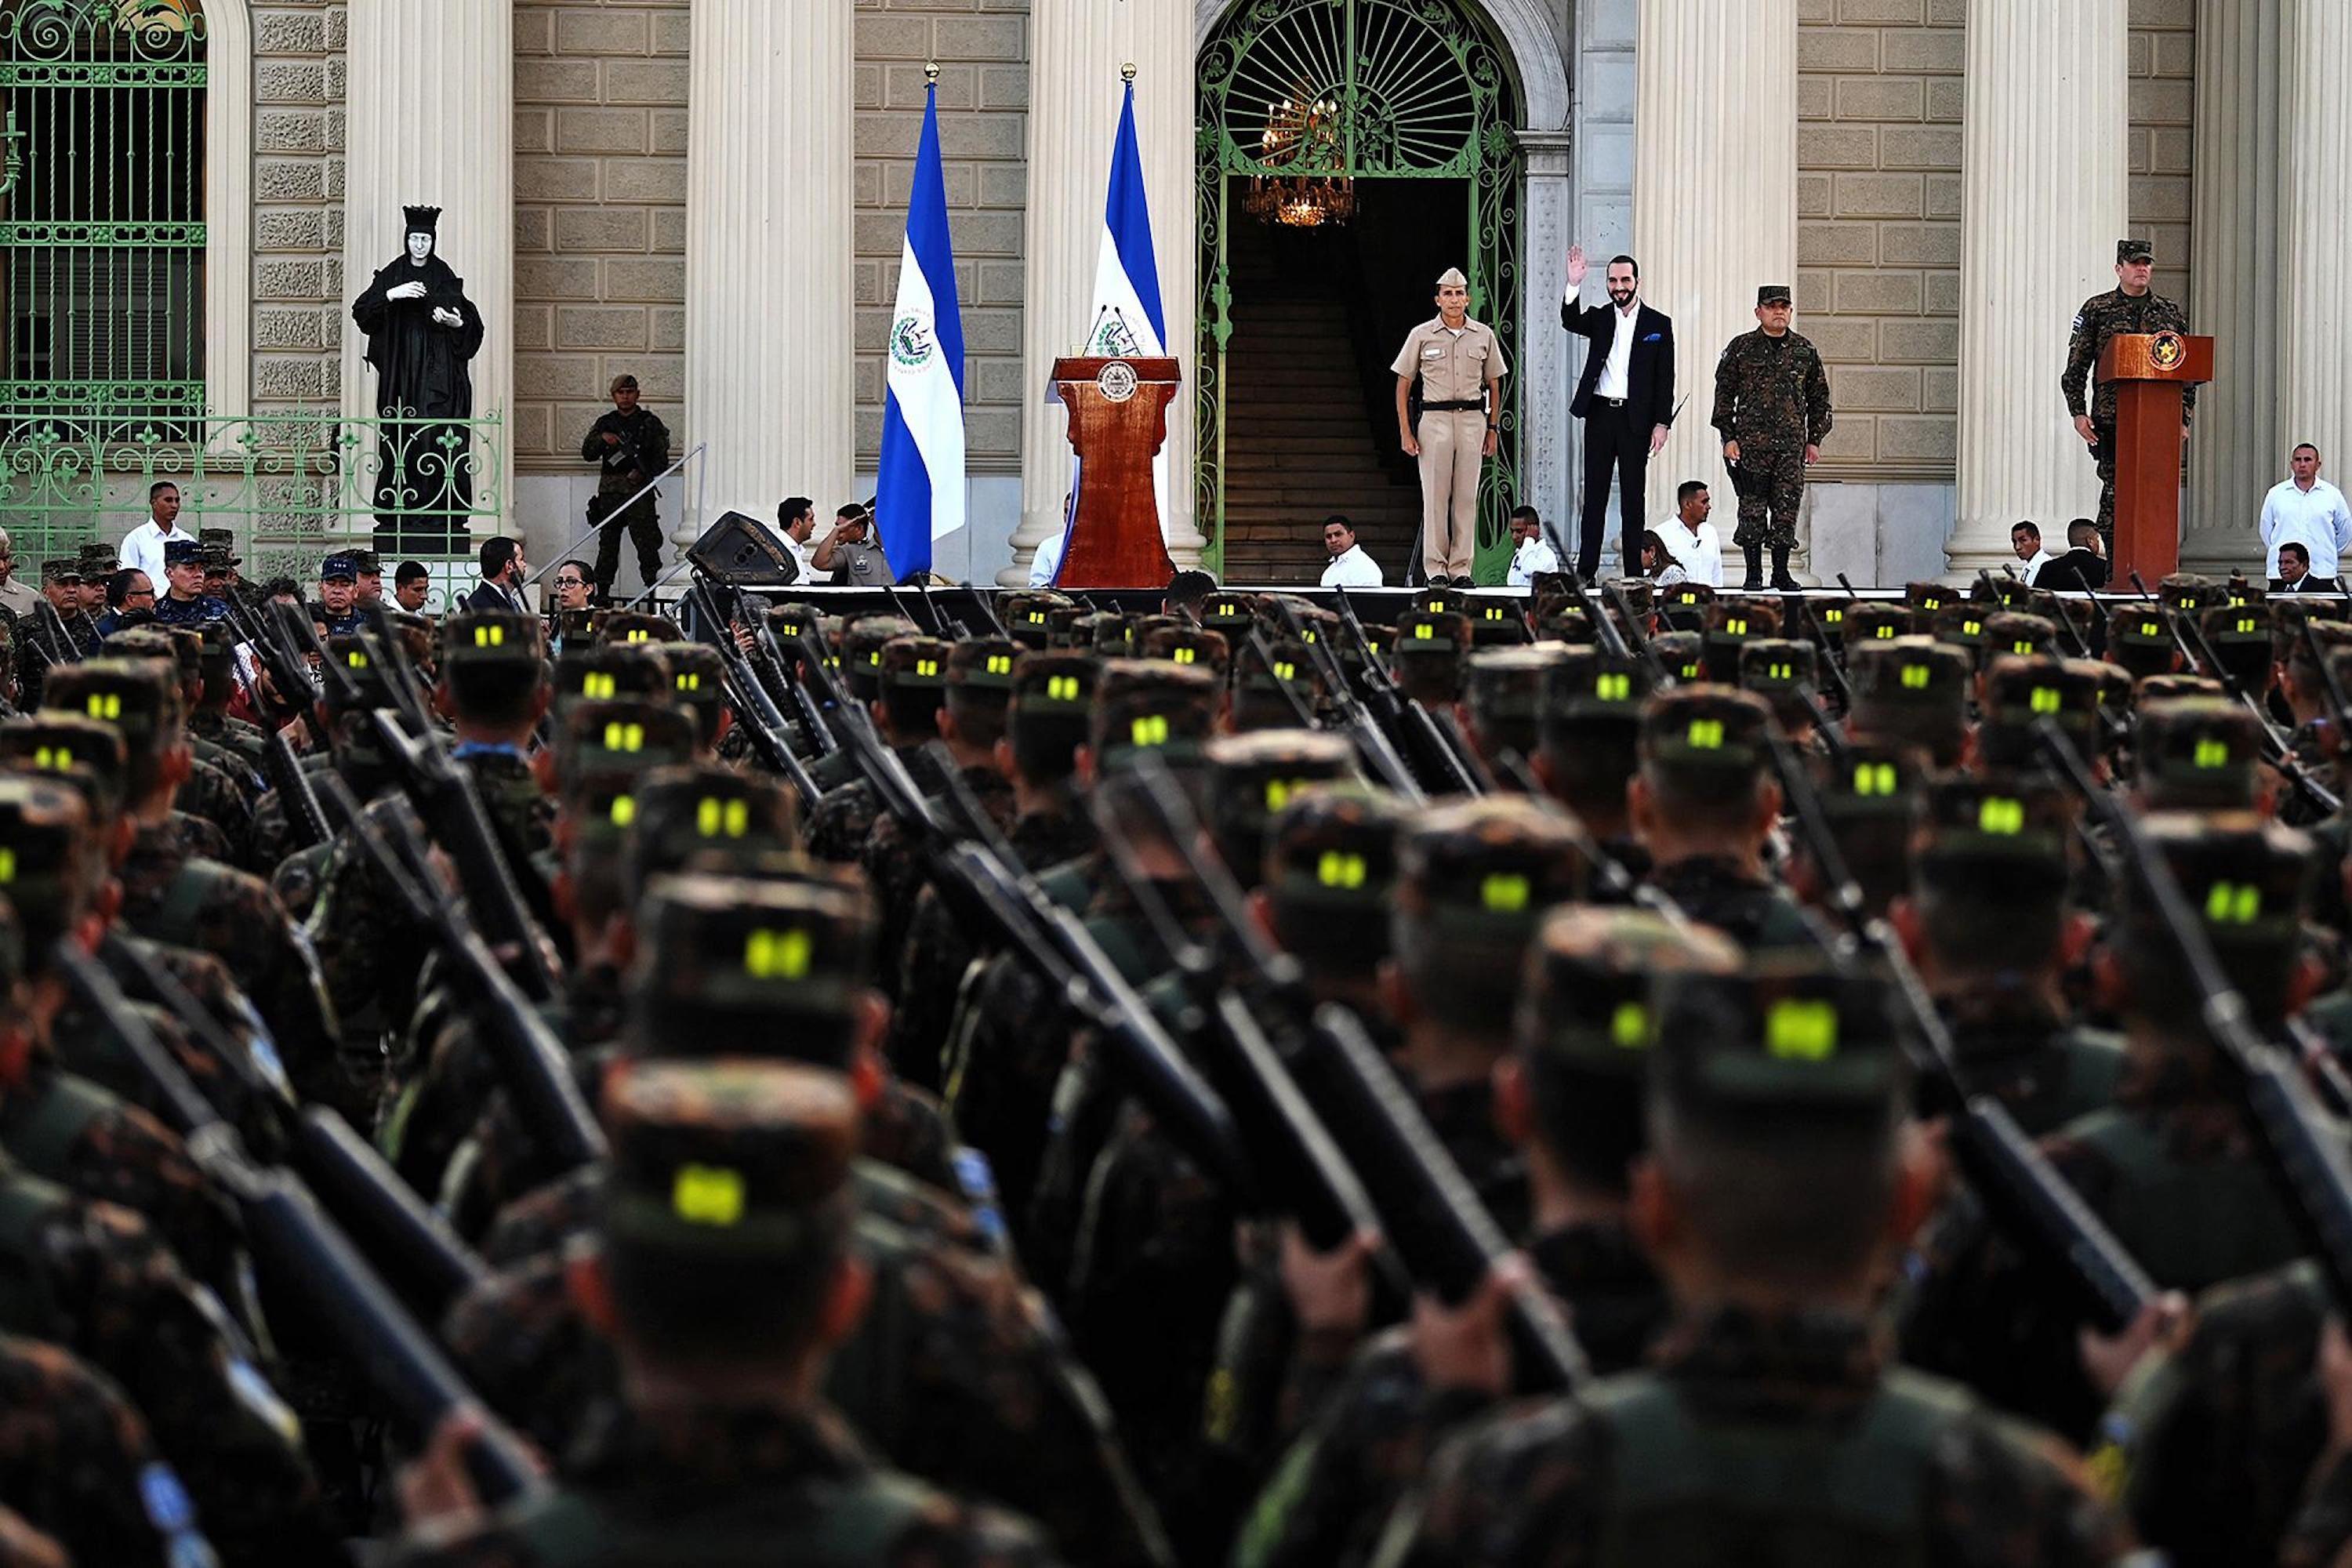 Bukele waves to the Armed Forces in Gerardo Barrios Plaza in the Historic Center of El Salvador on July 29, 2019. In the first two years of his administration, the military budget grew by 70 percent. Photo: El Faro Archive